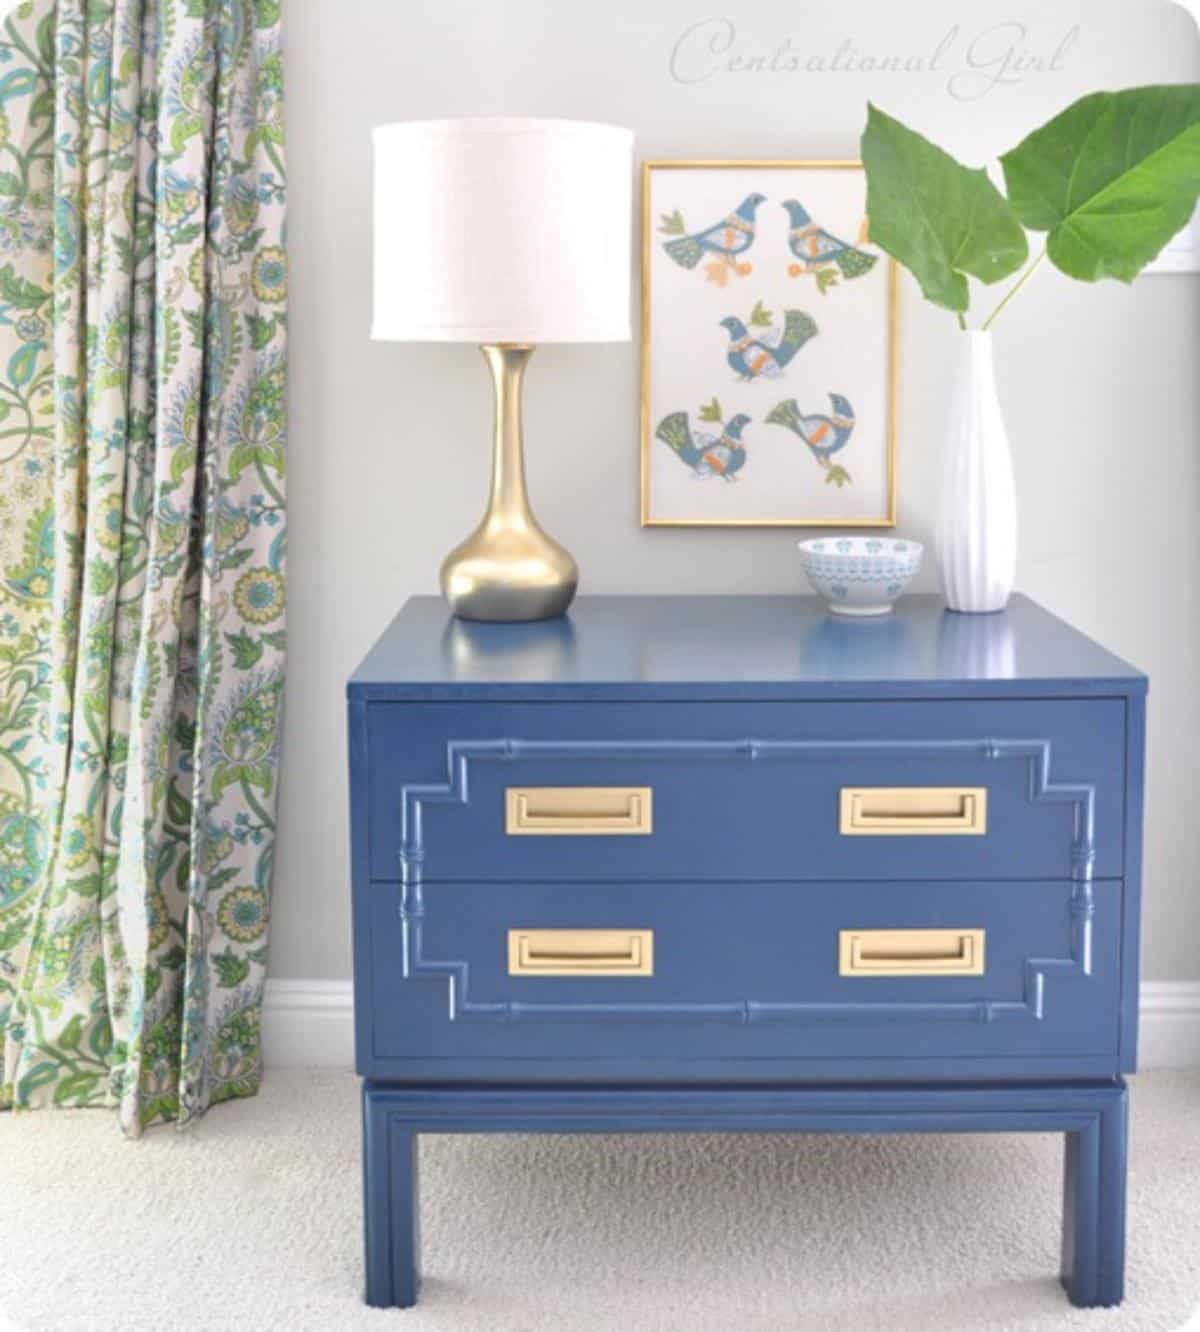 DIY Faux bamboo chest makeover